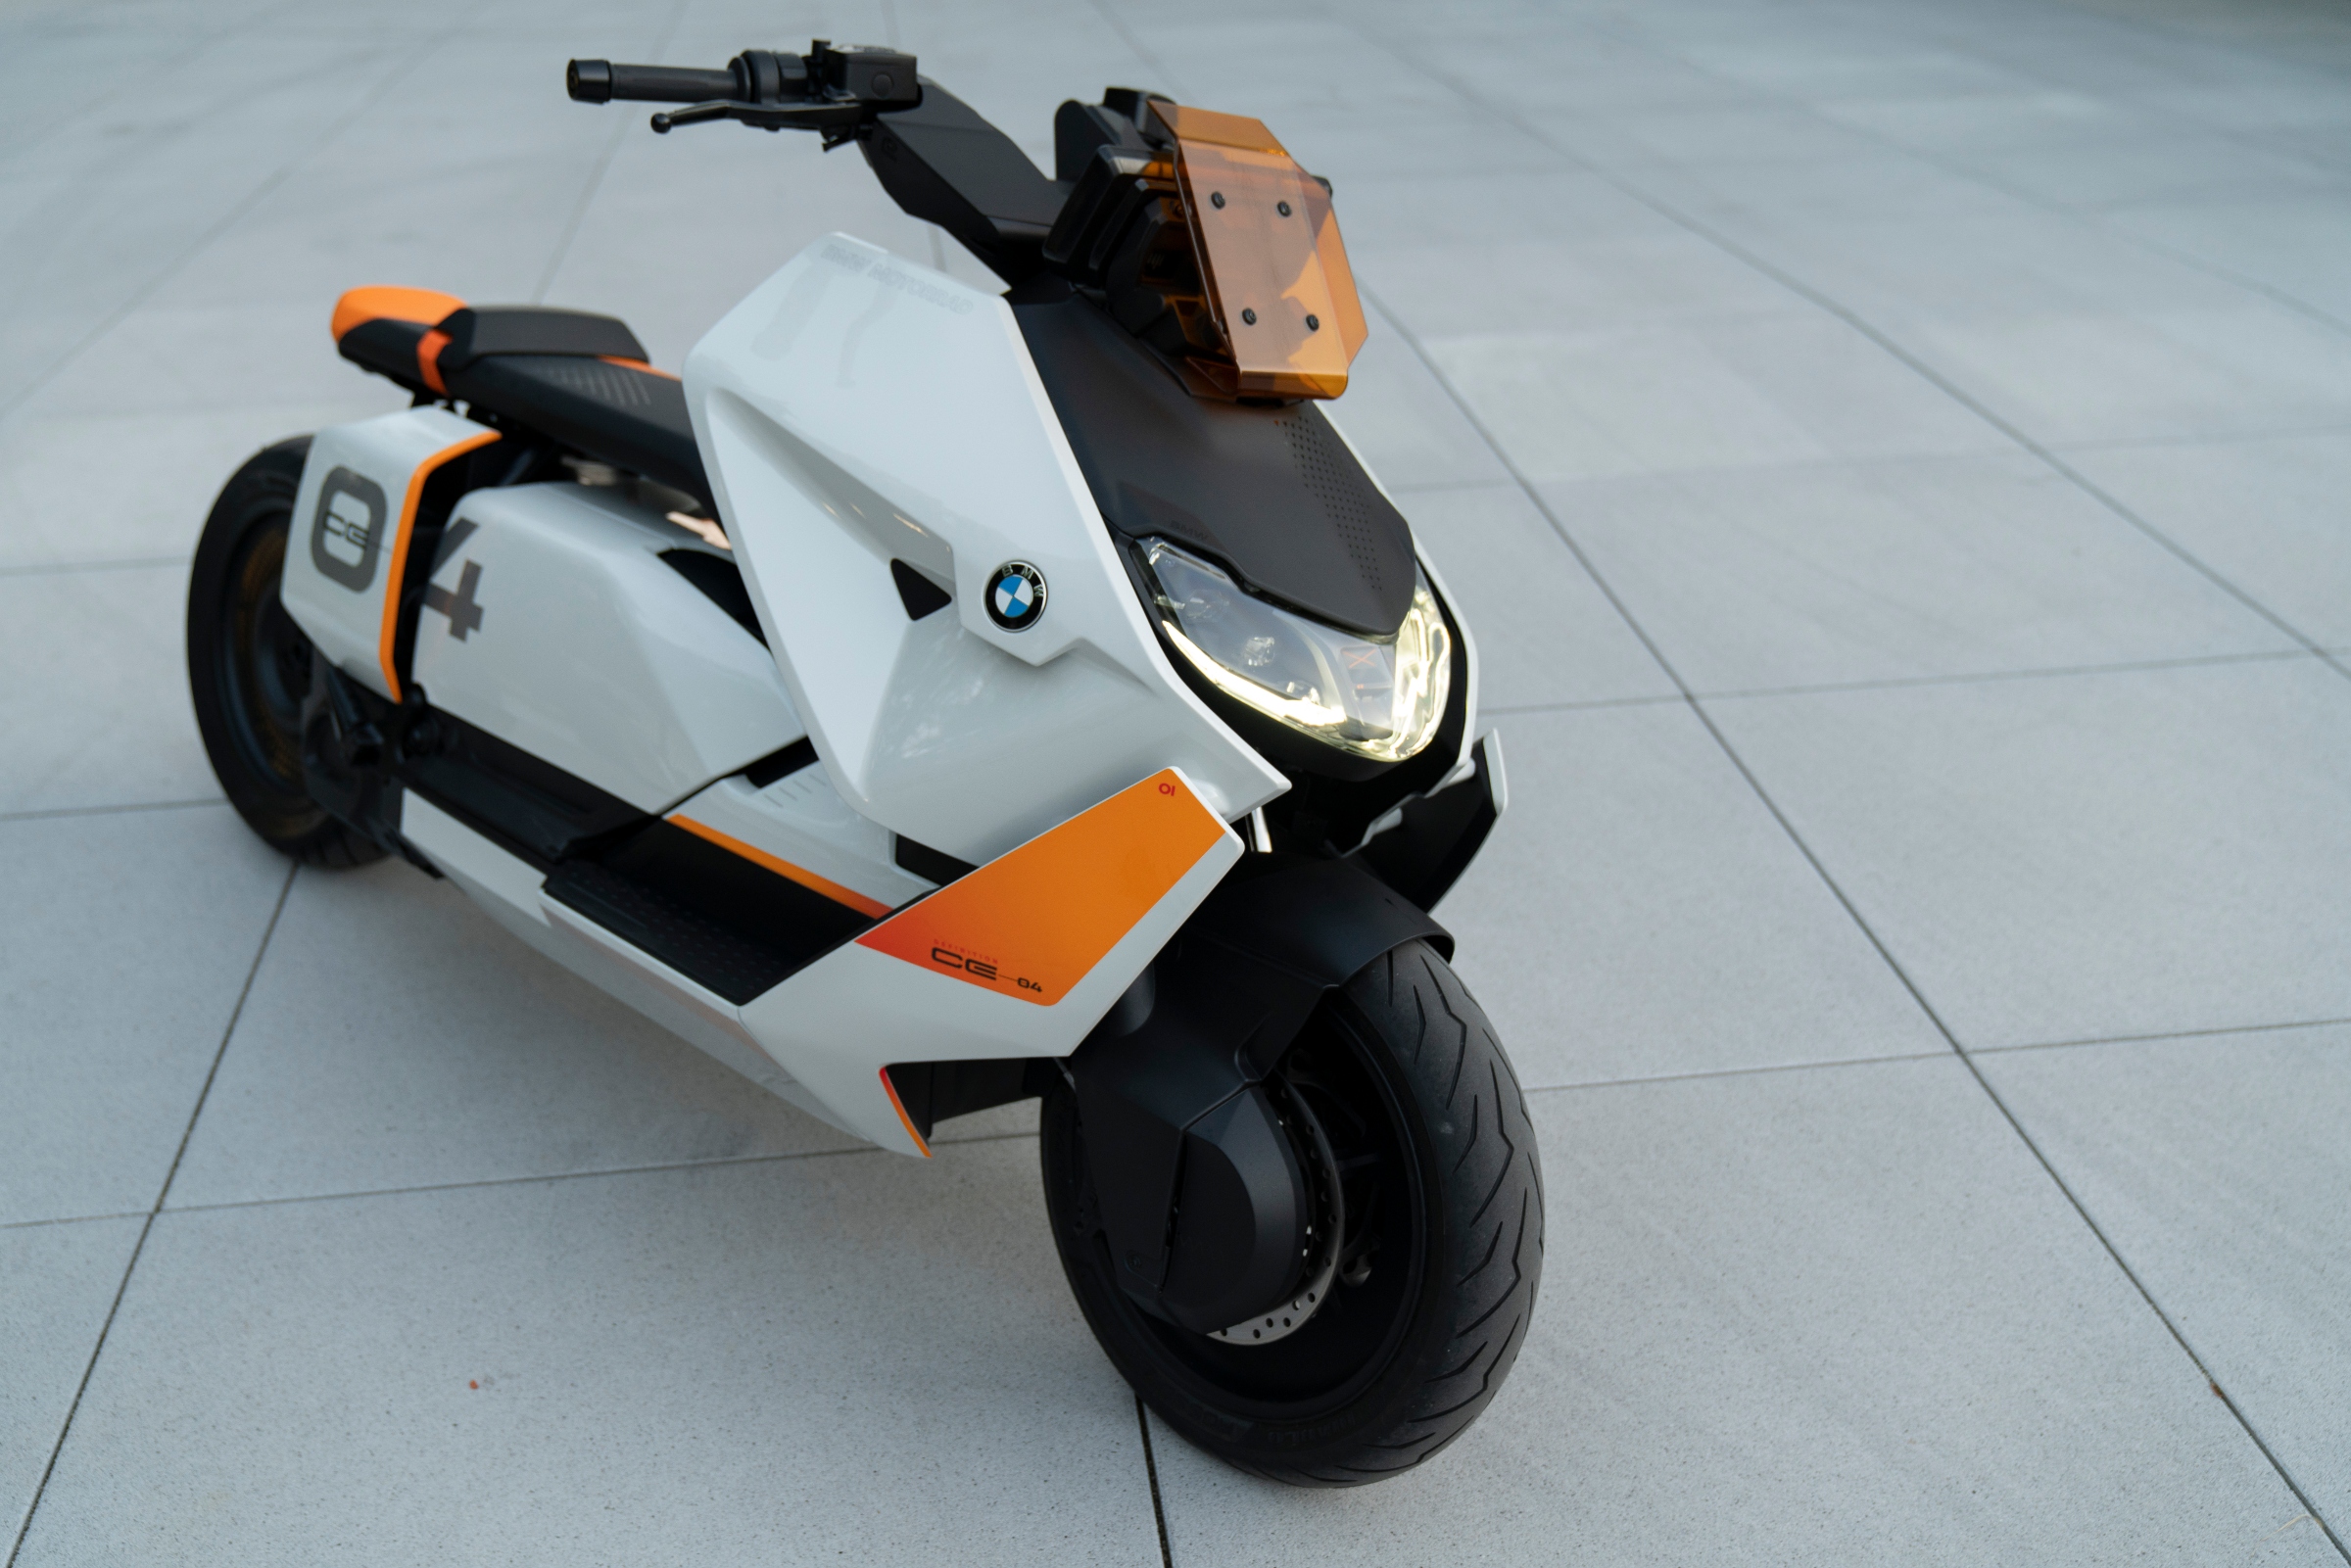 BMW Definition CE 04 redefines the scooter a ... | Visordown